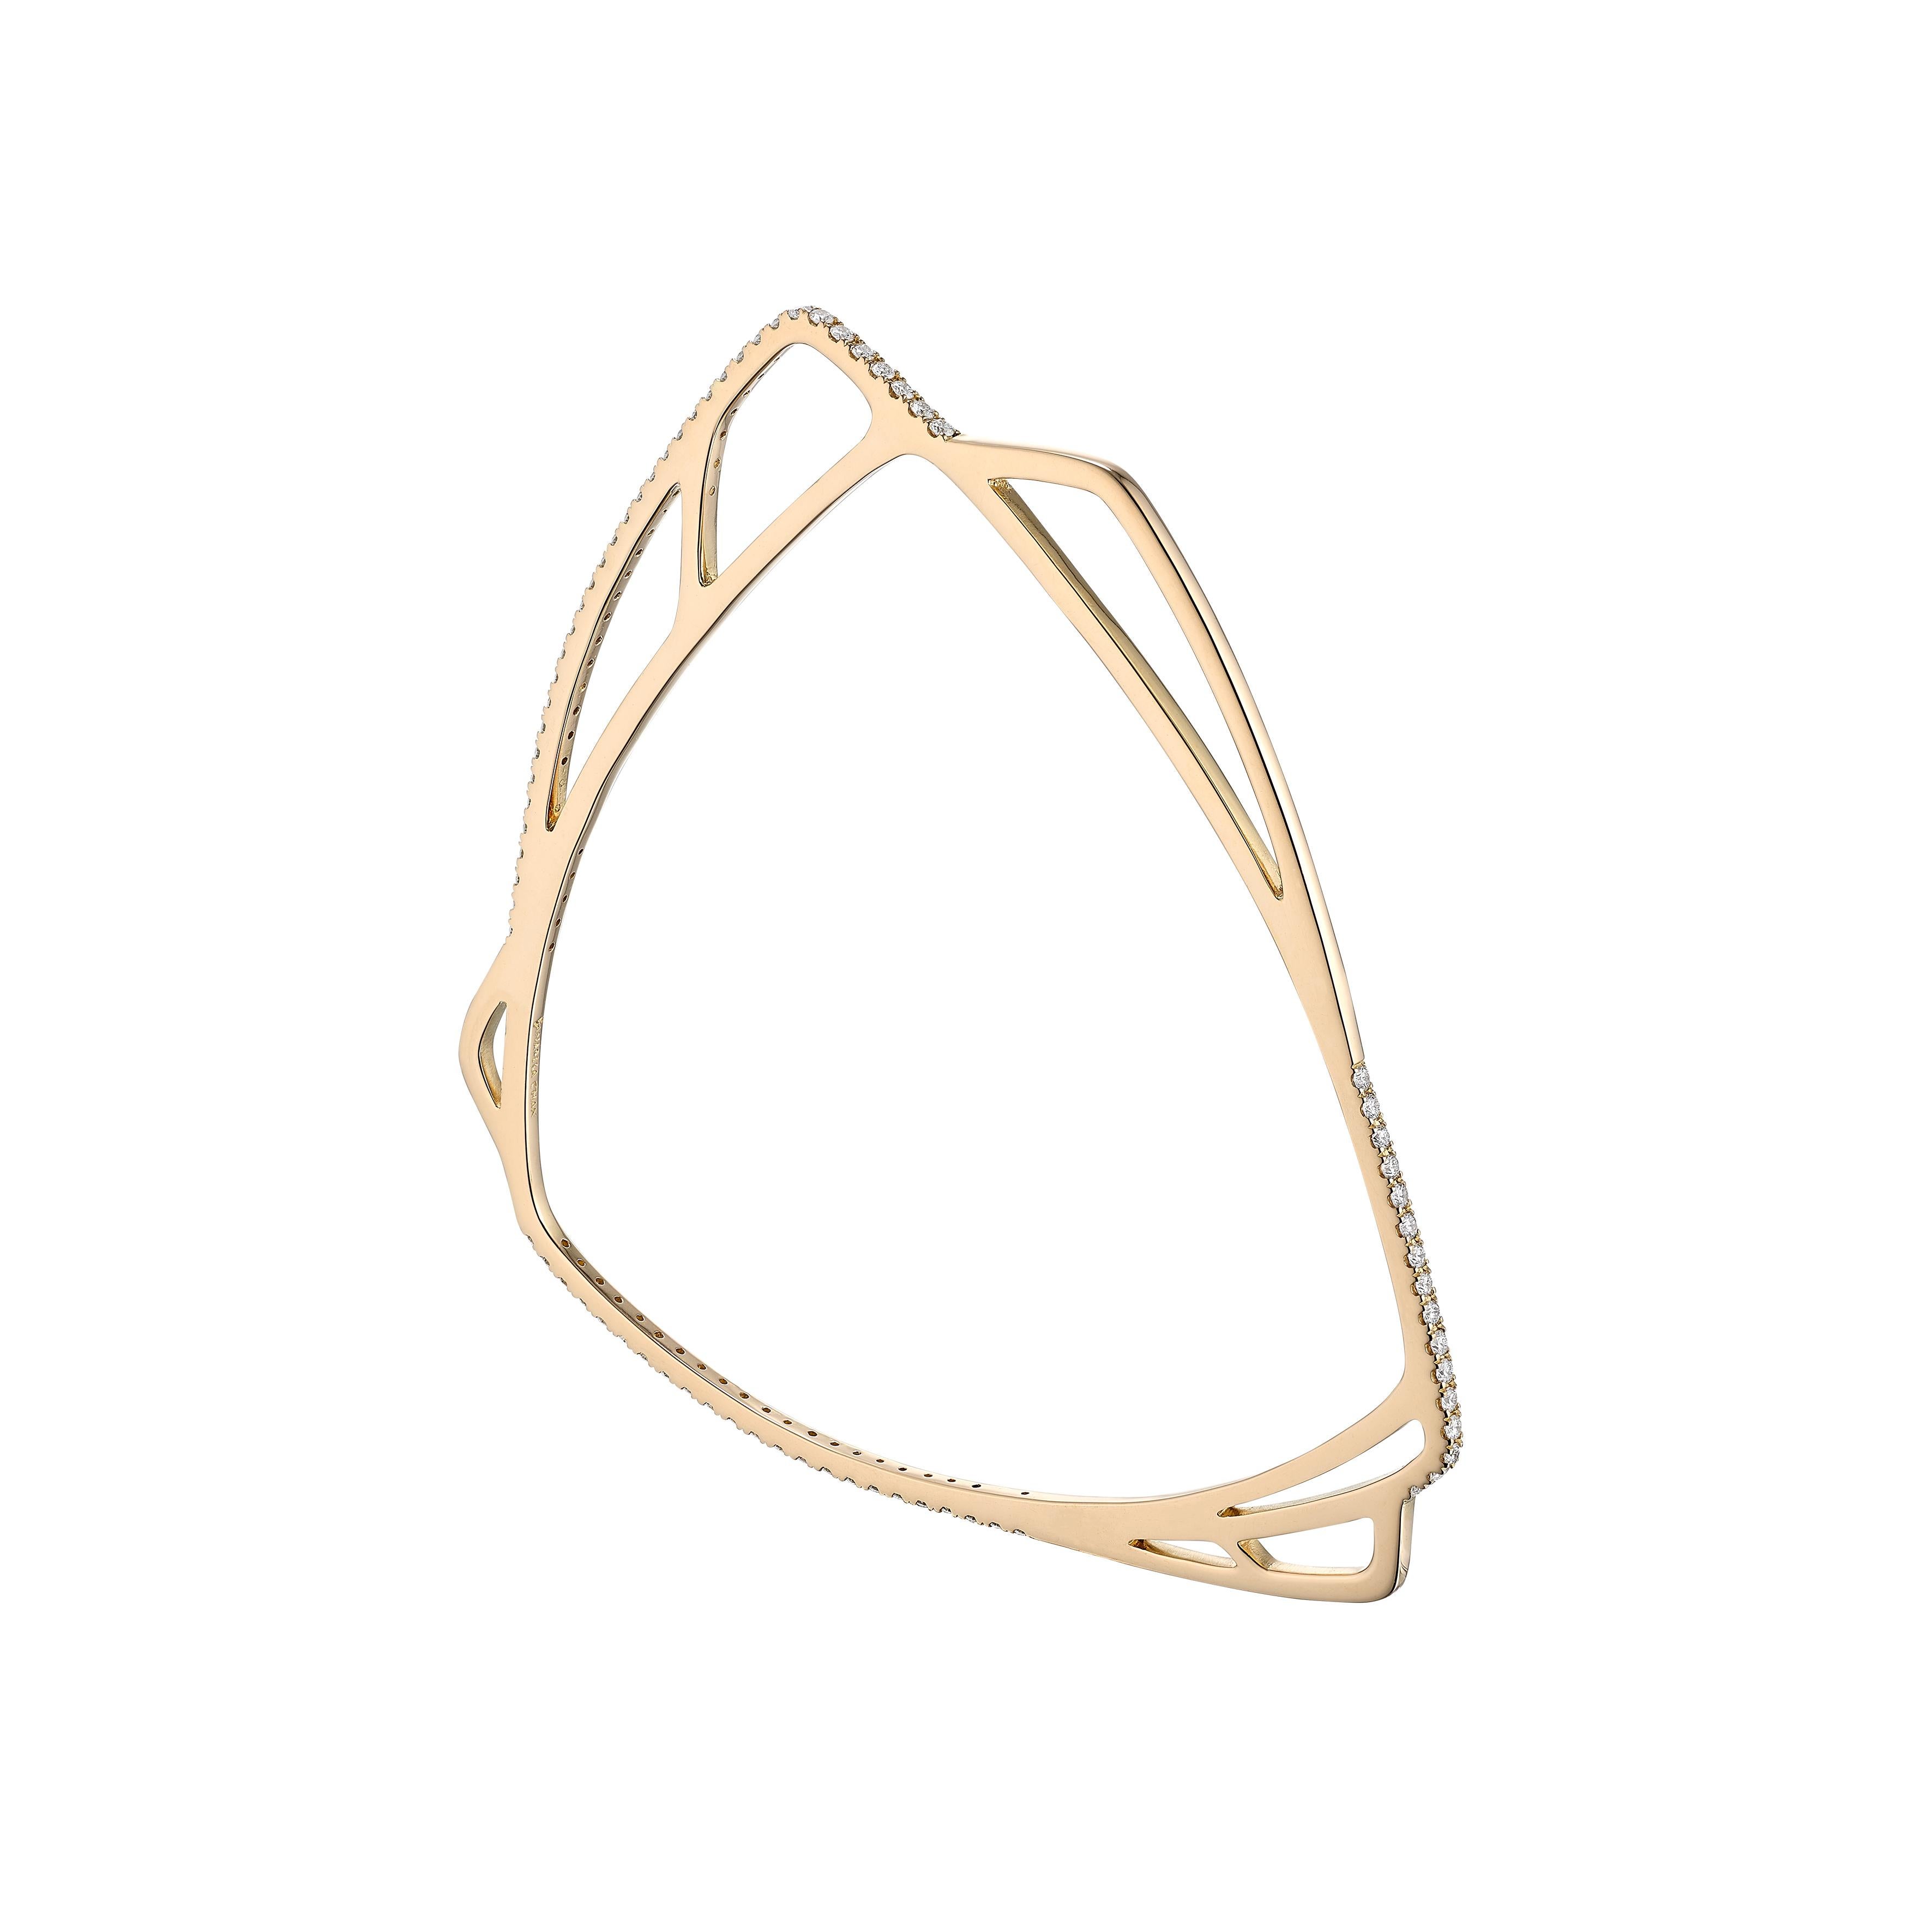 Contemporary Anabela Chan Fine Sustainable Jewellery Gold & Diamond Morpho Bracelet 01 Size S For Sale